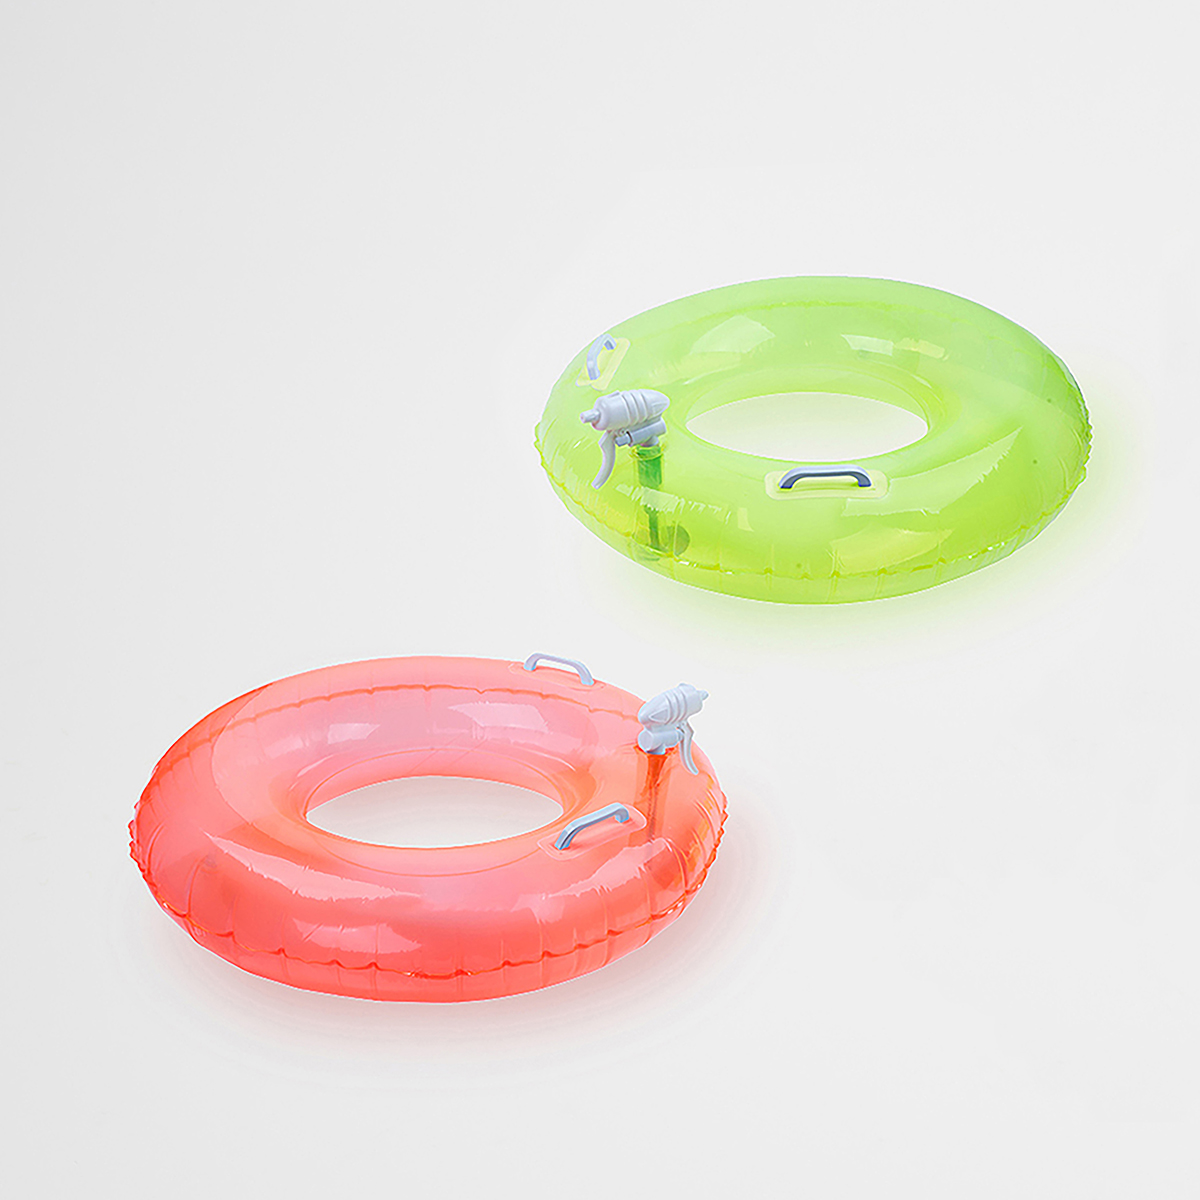 Pool Ring Soakers Citrus-Neon Coral Set of 2